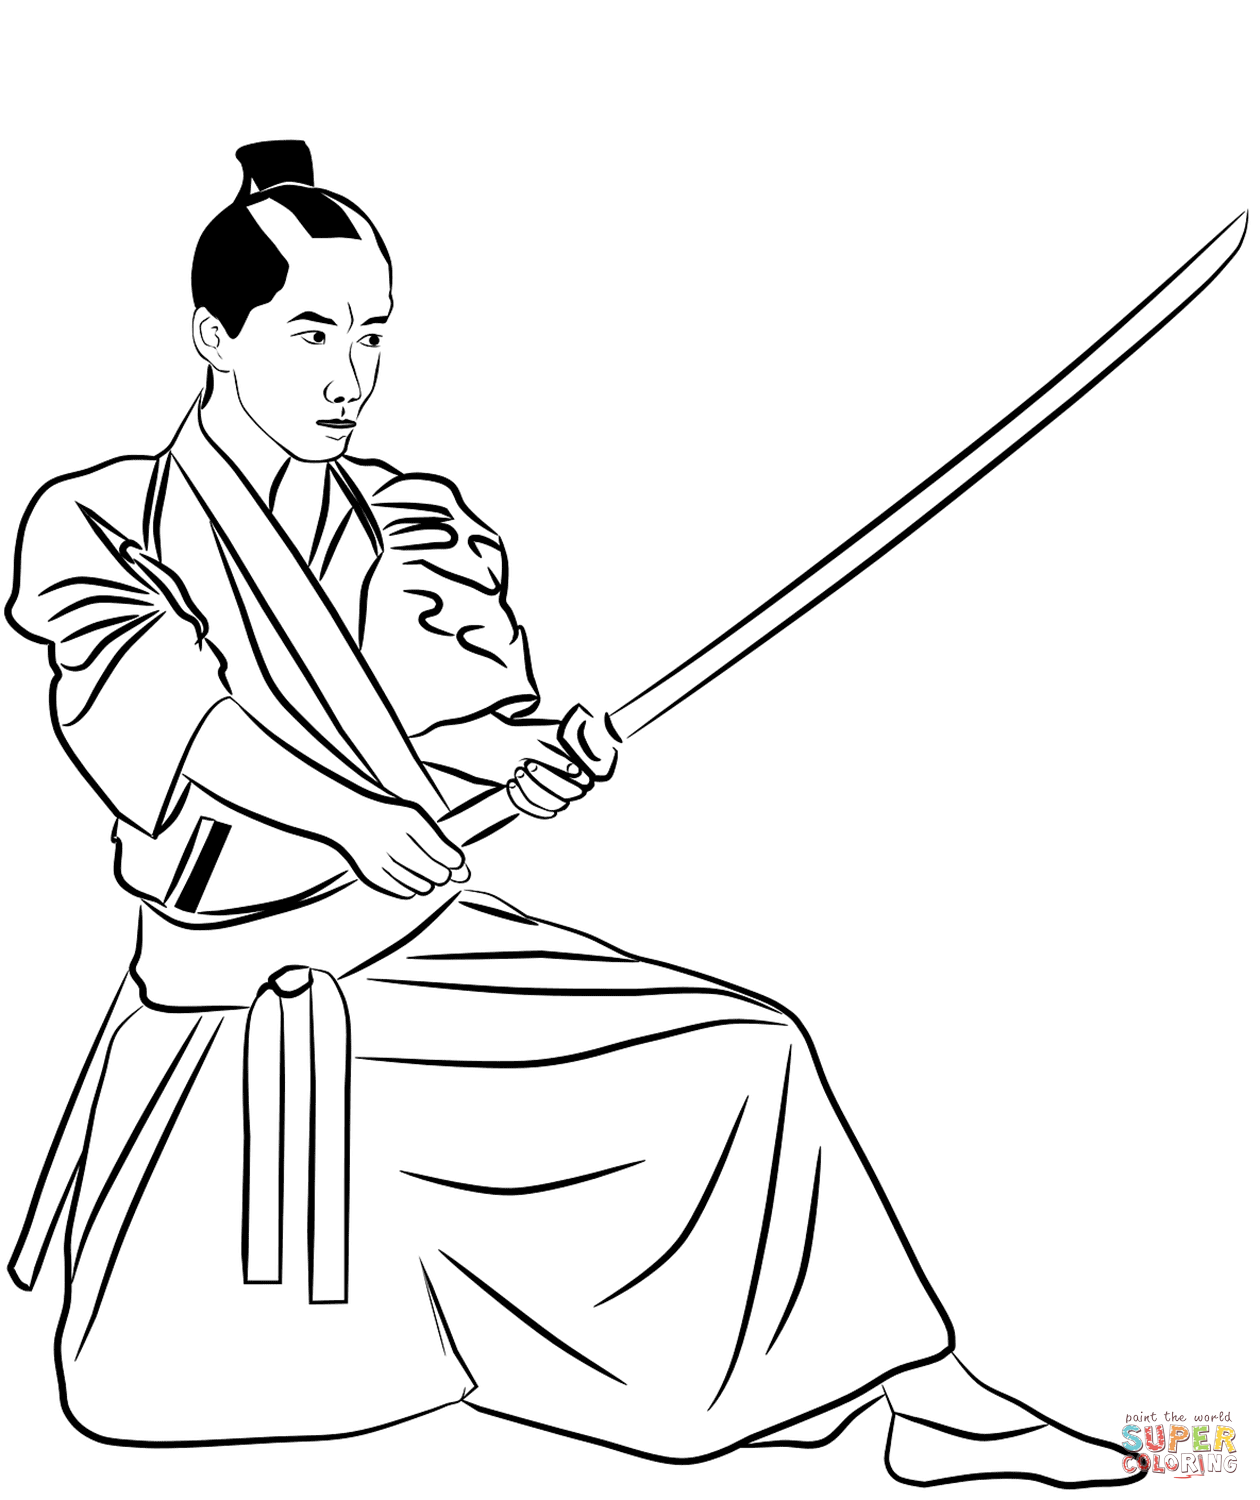 Samurai with Katana coloring page | Free Printable Coloring Pages